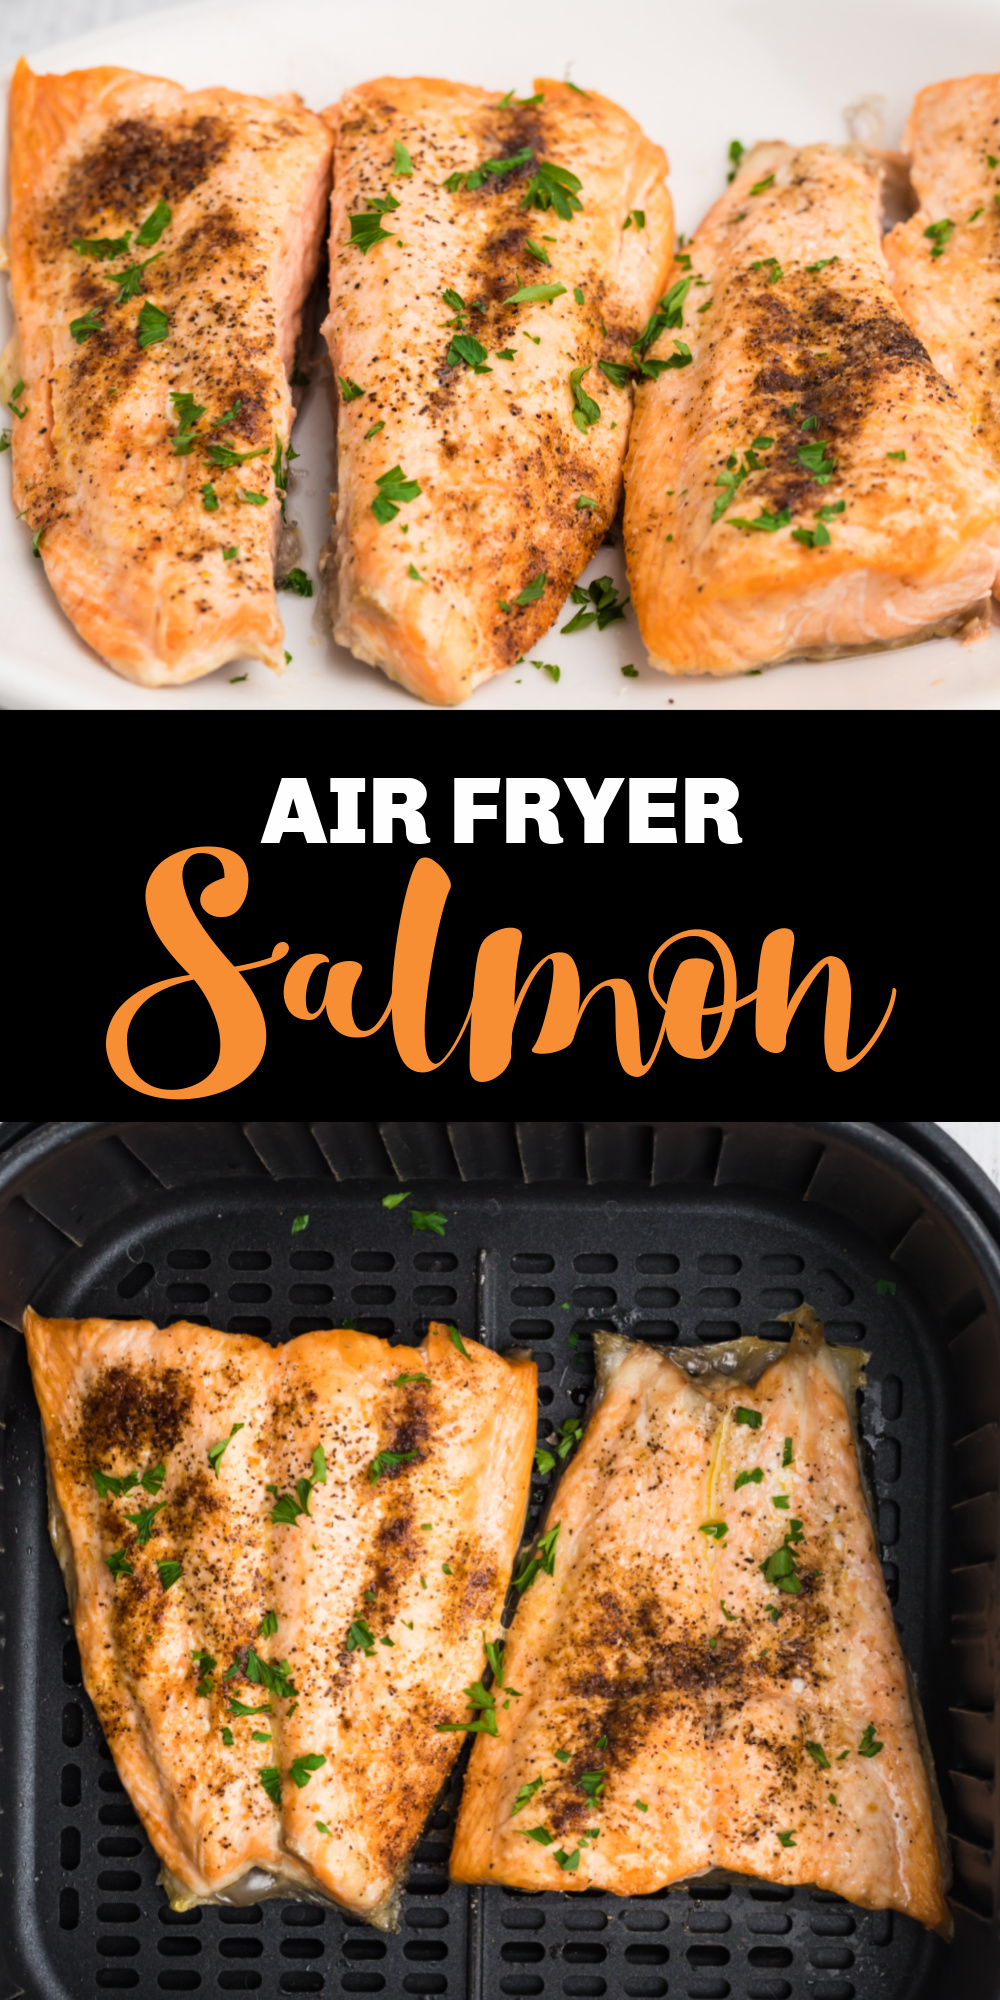 Salmon is one of my favorite ways to get my daily protein and this Air Fryer Salmon is a quick and easy way to do it! No more ovens or grills - just 10 minutes in the Air Fryer for the perfect, simple salmon.